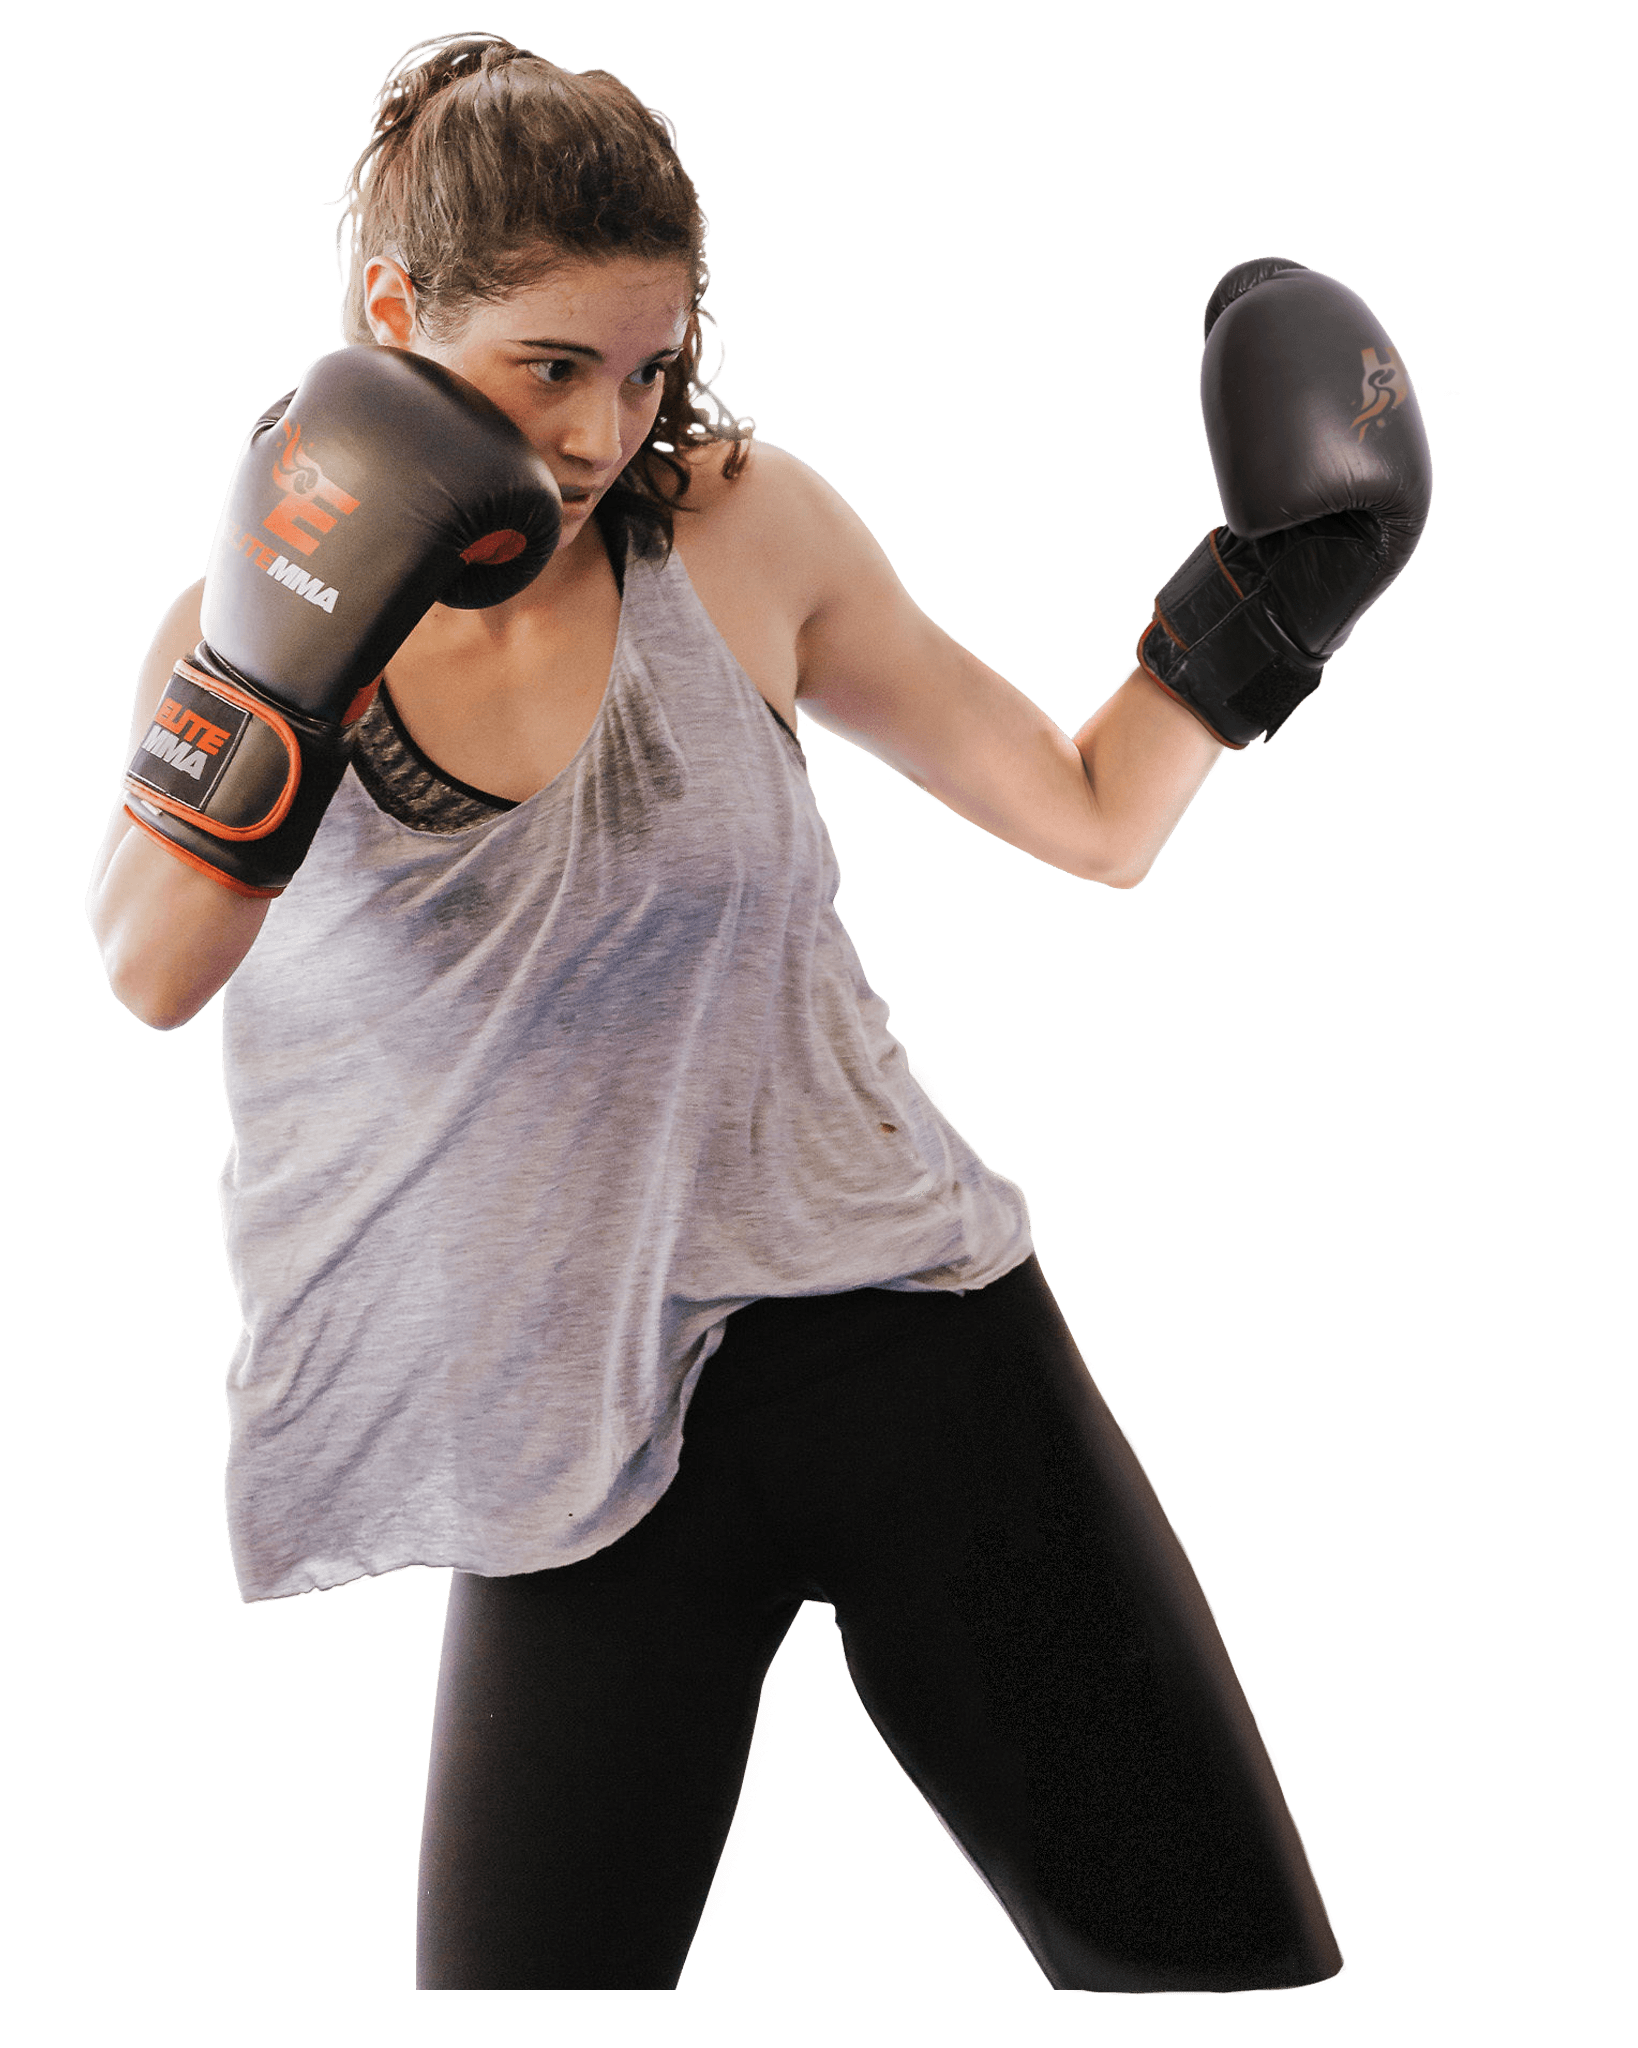 Woman Boxer Fighter HQ Image Free PNG Image